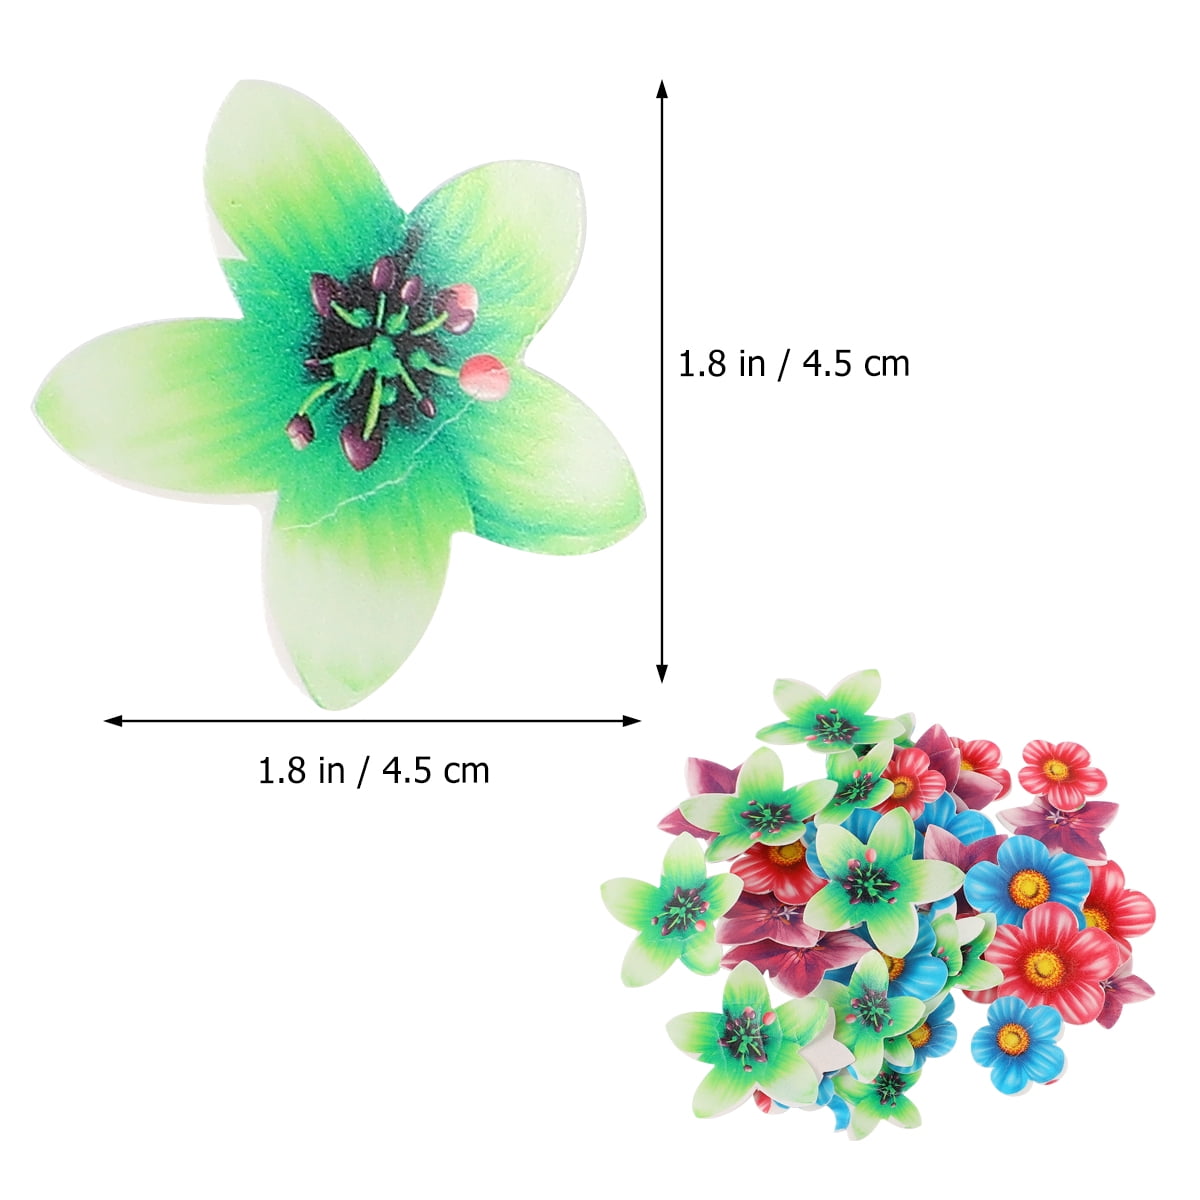 Flower Cupcake Toppers 360Pcs Creative Glutinous Rice Paper Edible ...